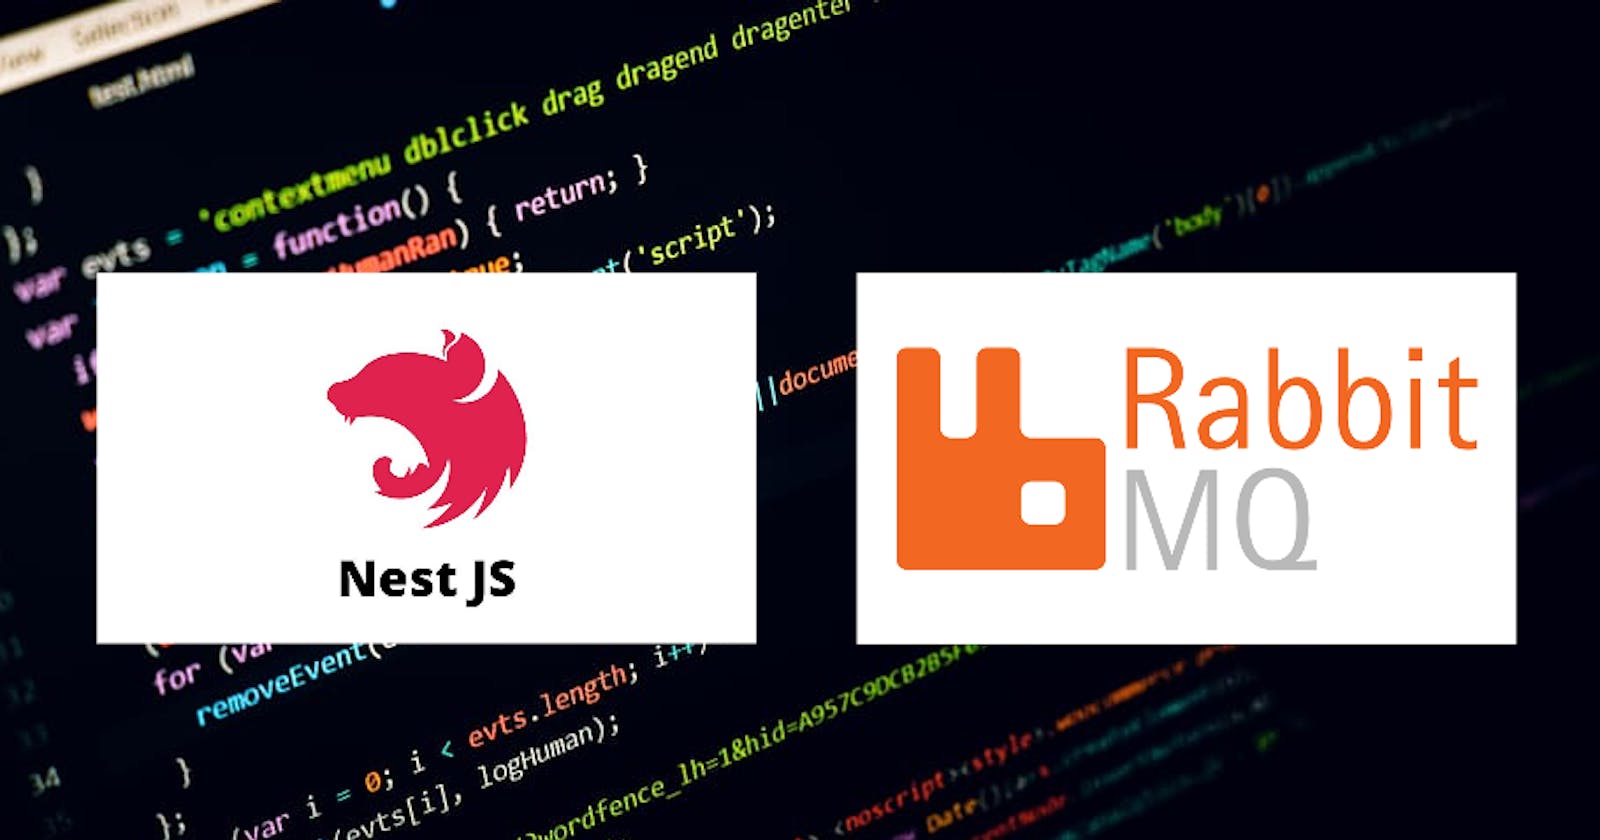 Building a Scalable Application with NodeJS, NestJS, and RabbitMQ